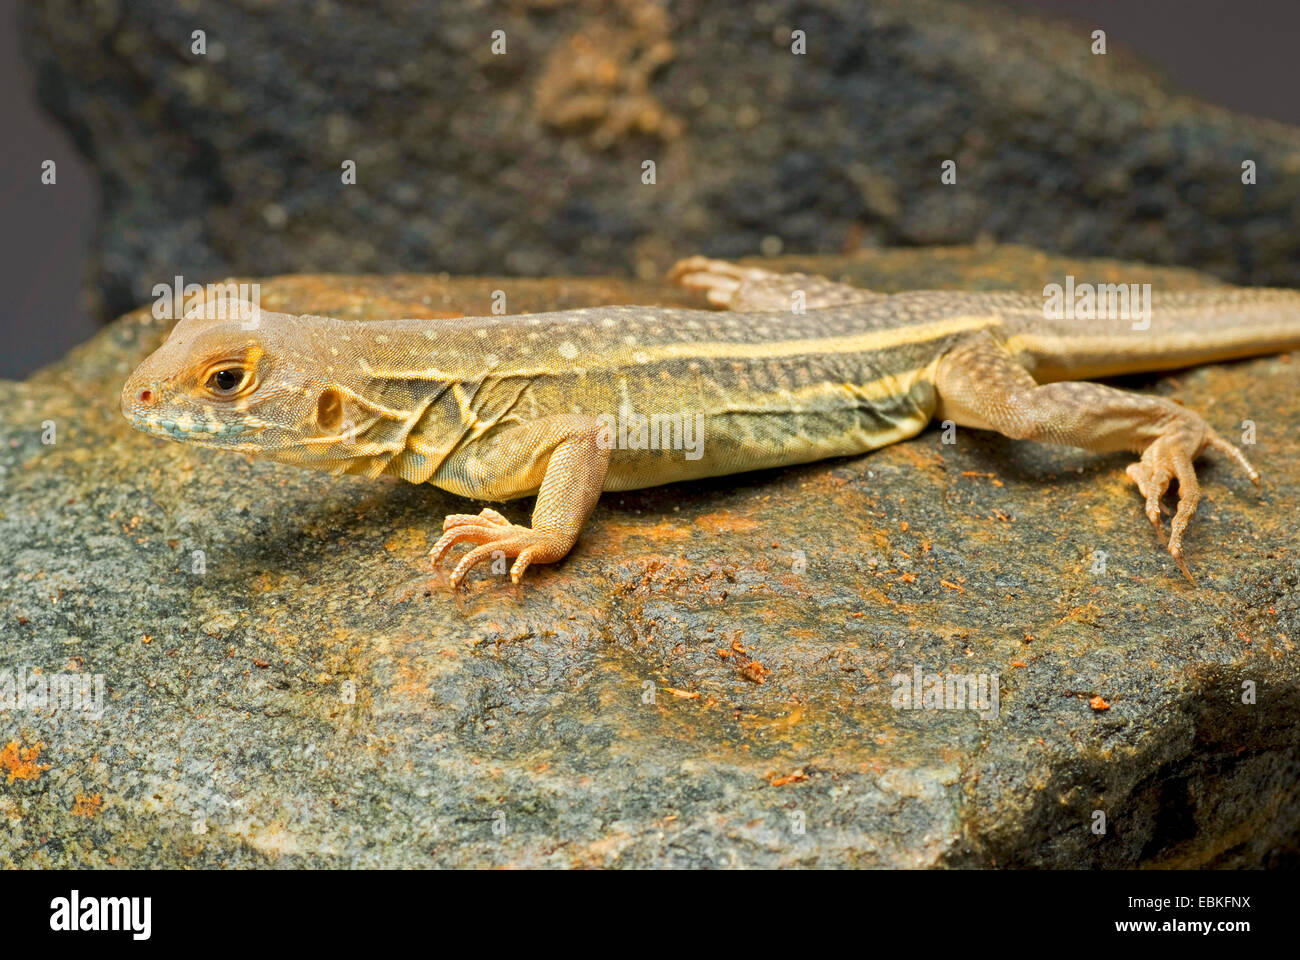 Boehme's Butterfly Lizard (Leiolepis boehmei), on a stone Stock Photo